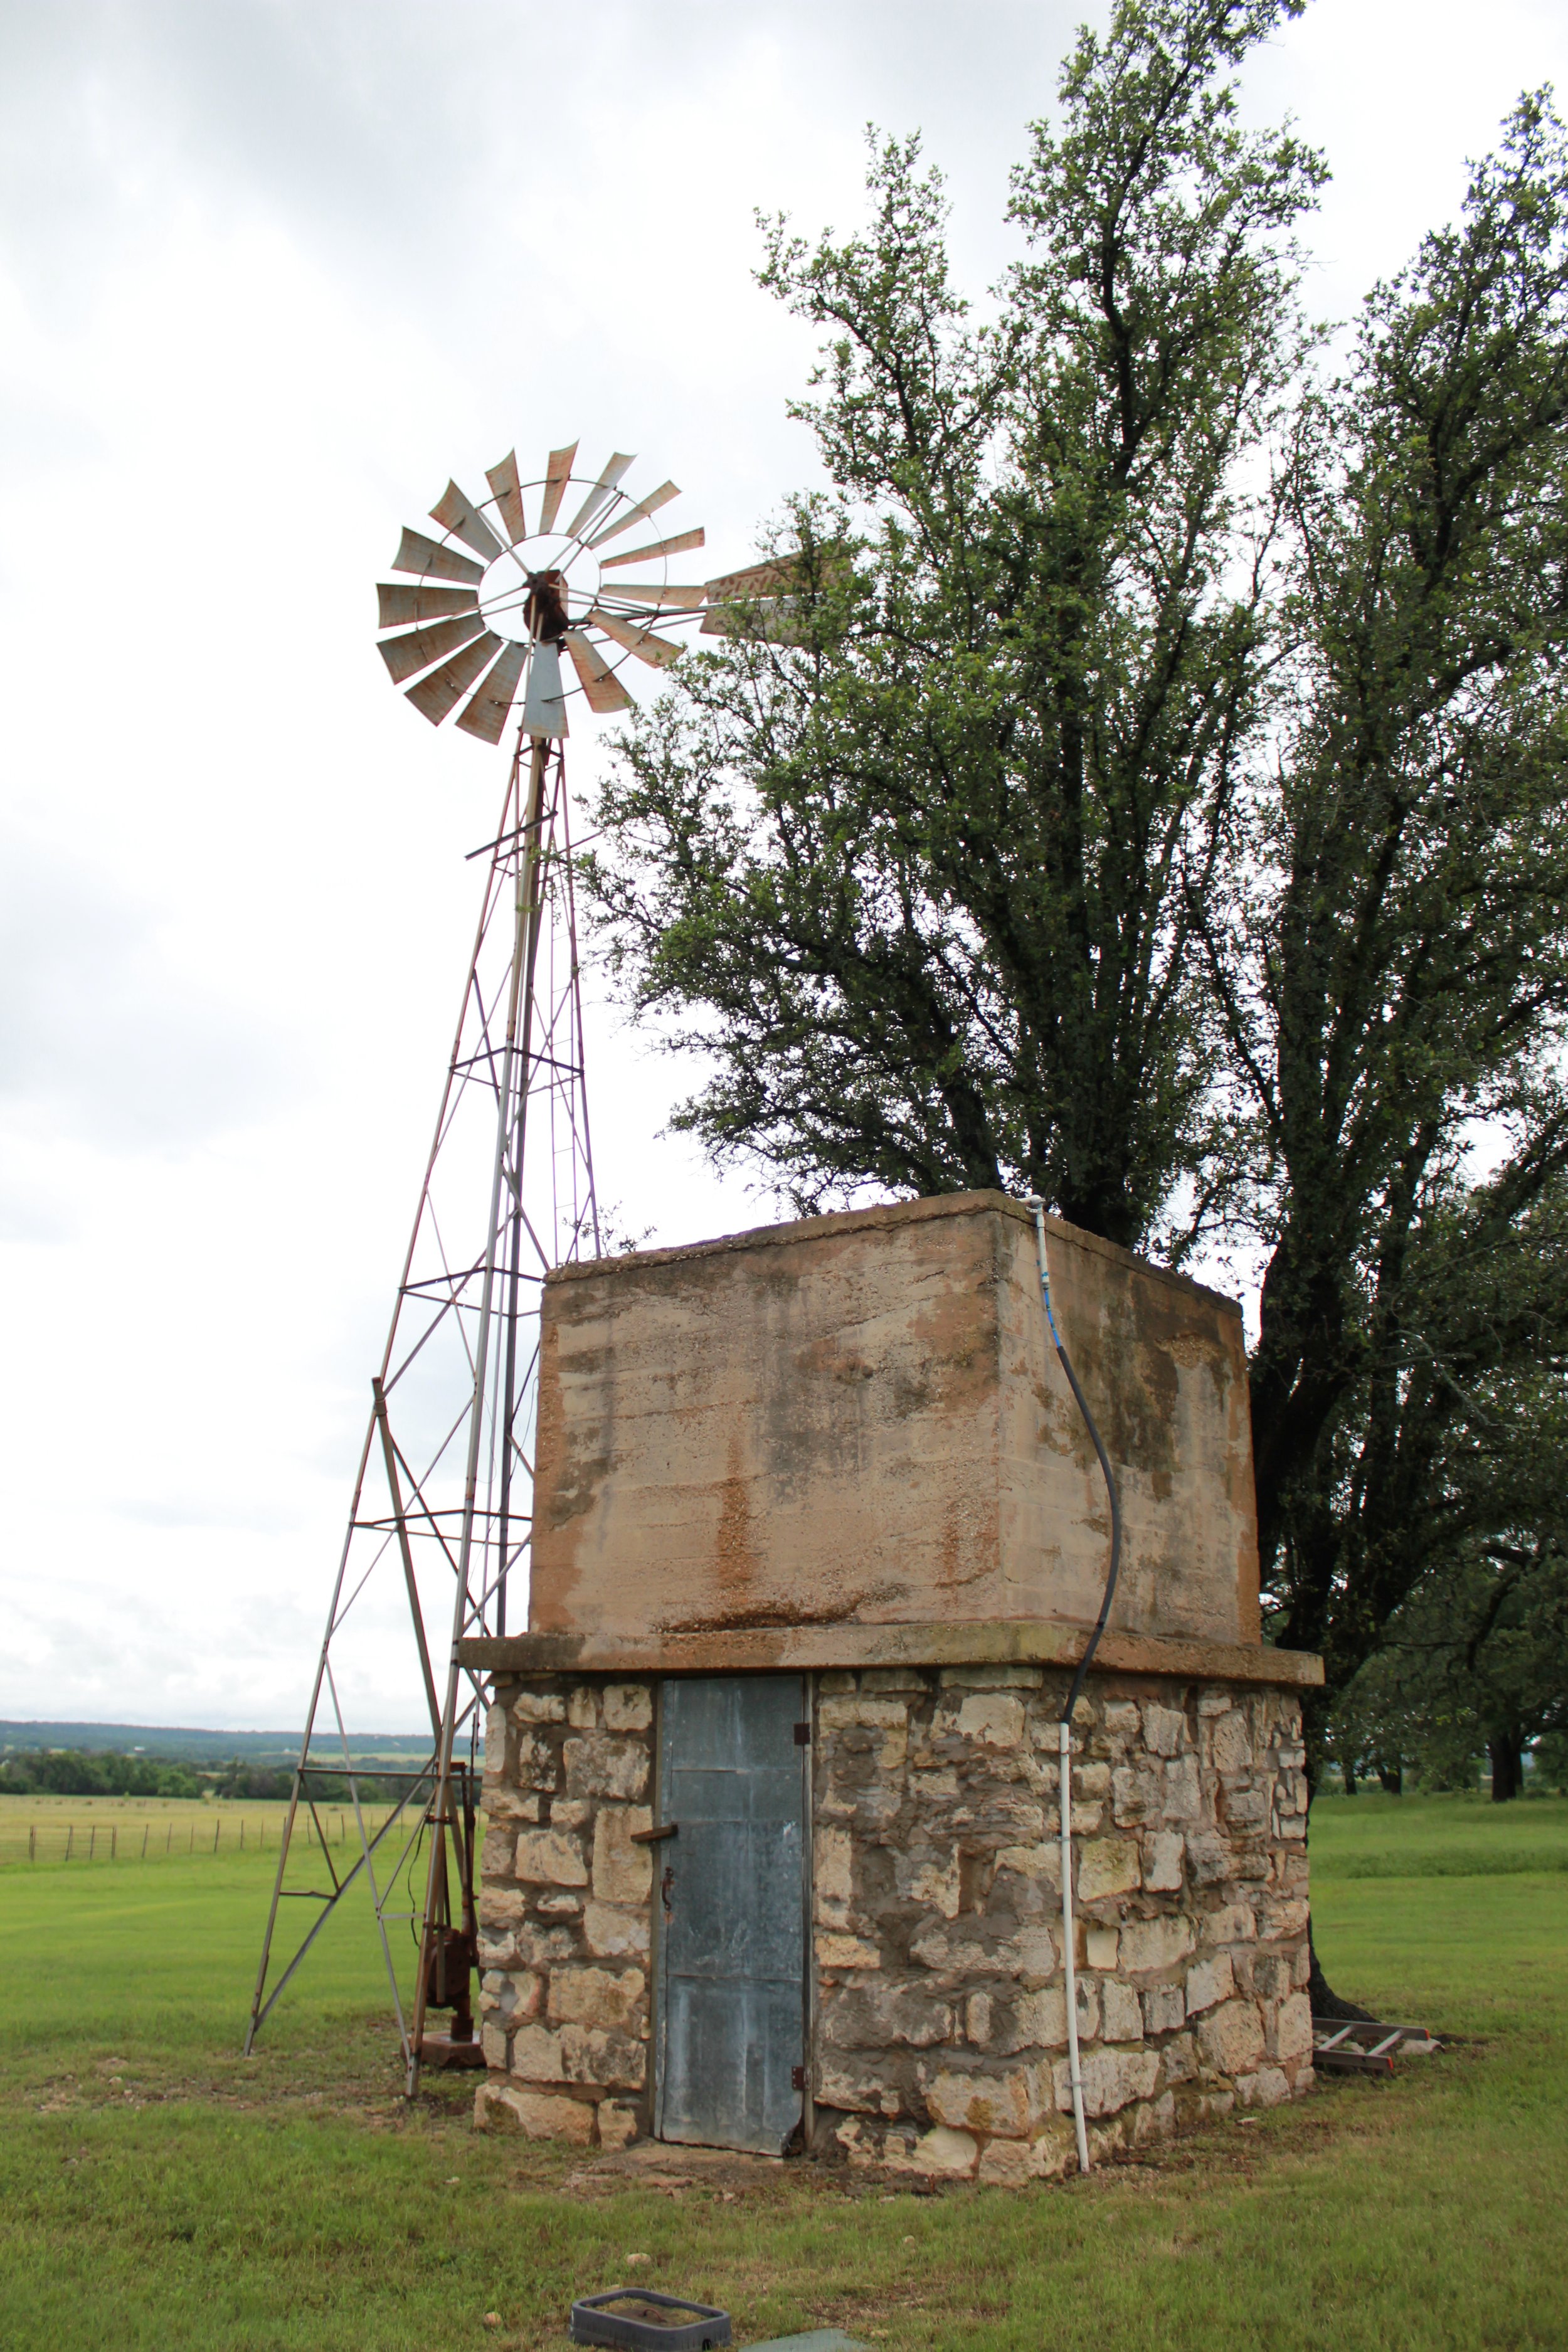 This old windmill-architecture-by-george-old-windmill.JPG